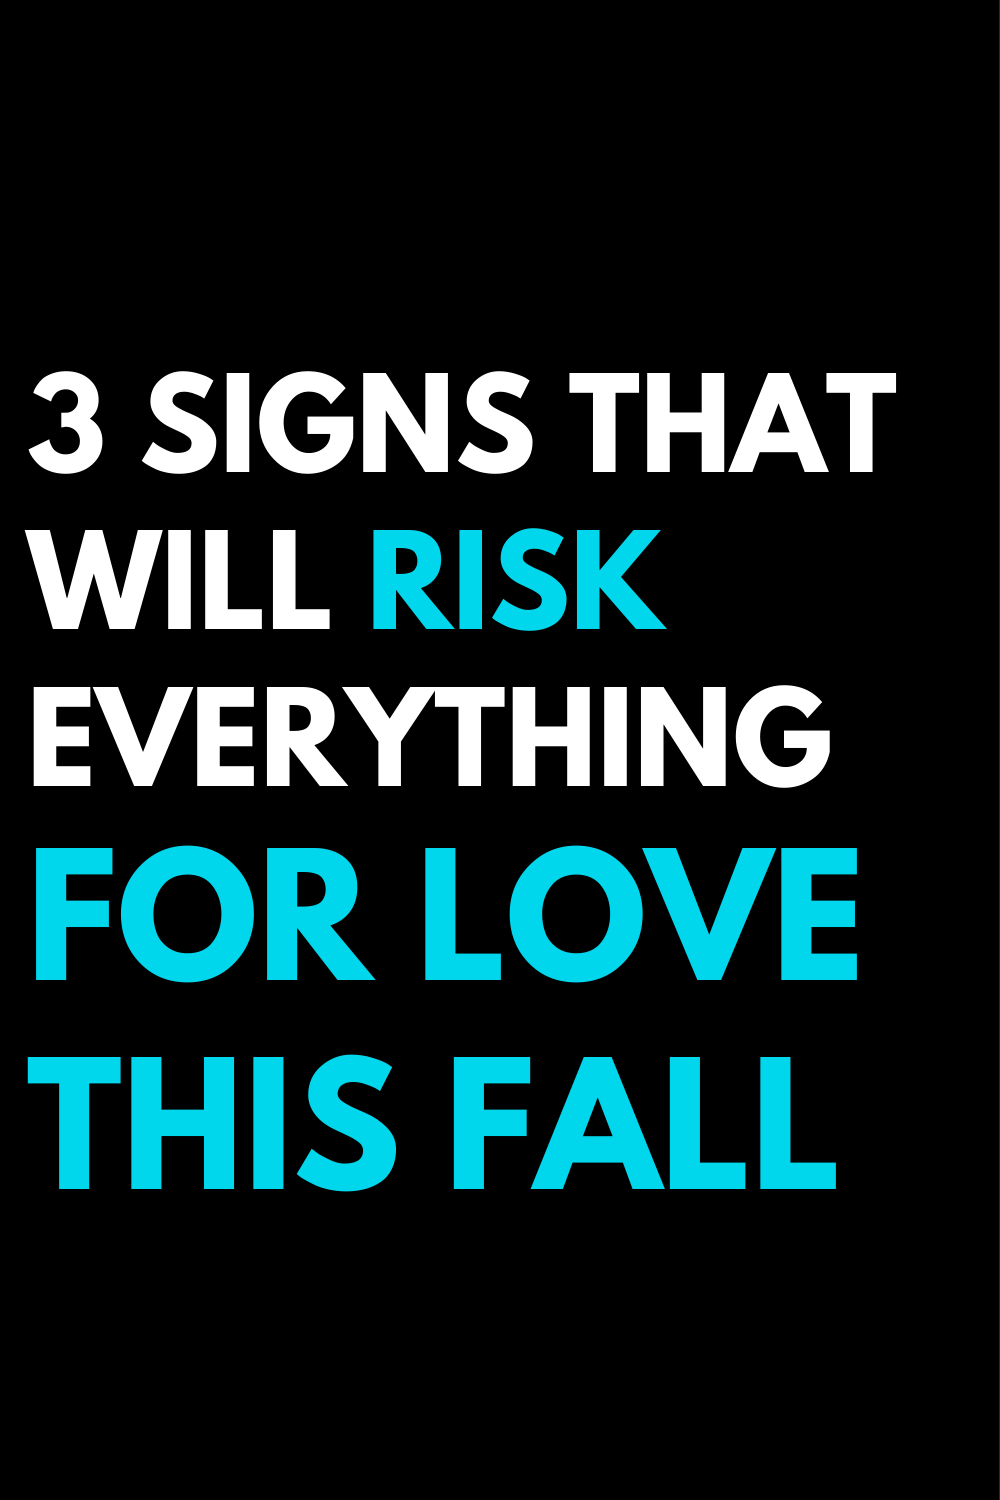 3 signs that will risk everything for love this fall